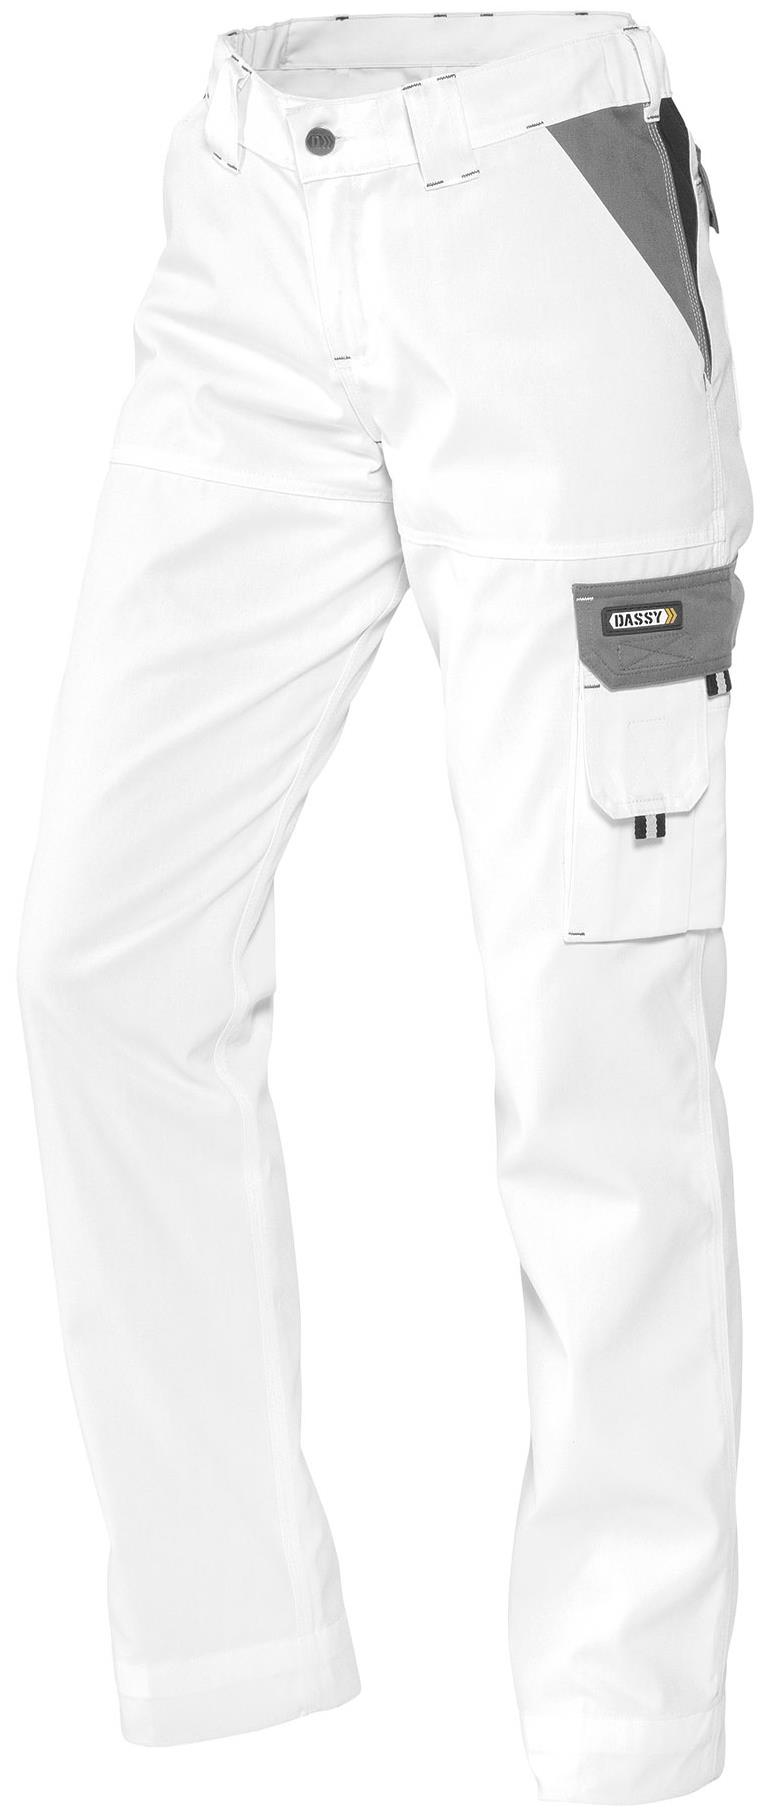 Trousers e.s.motion ten, ladies' disguisegreen | Strauss